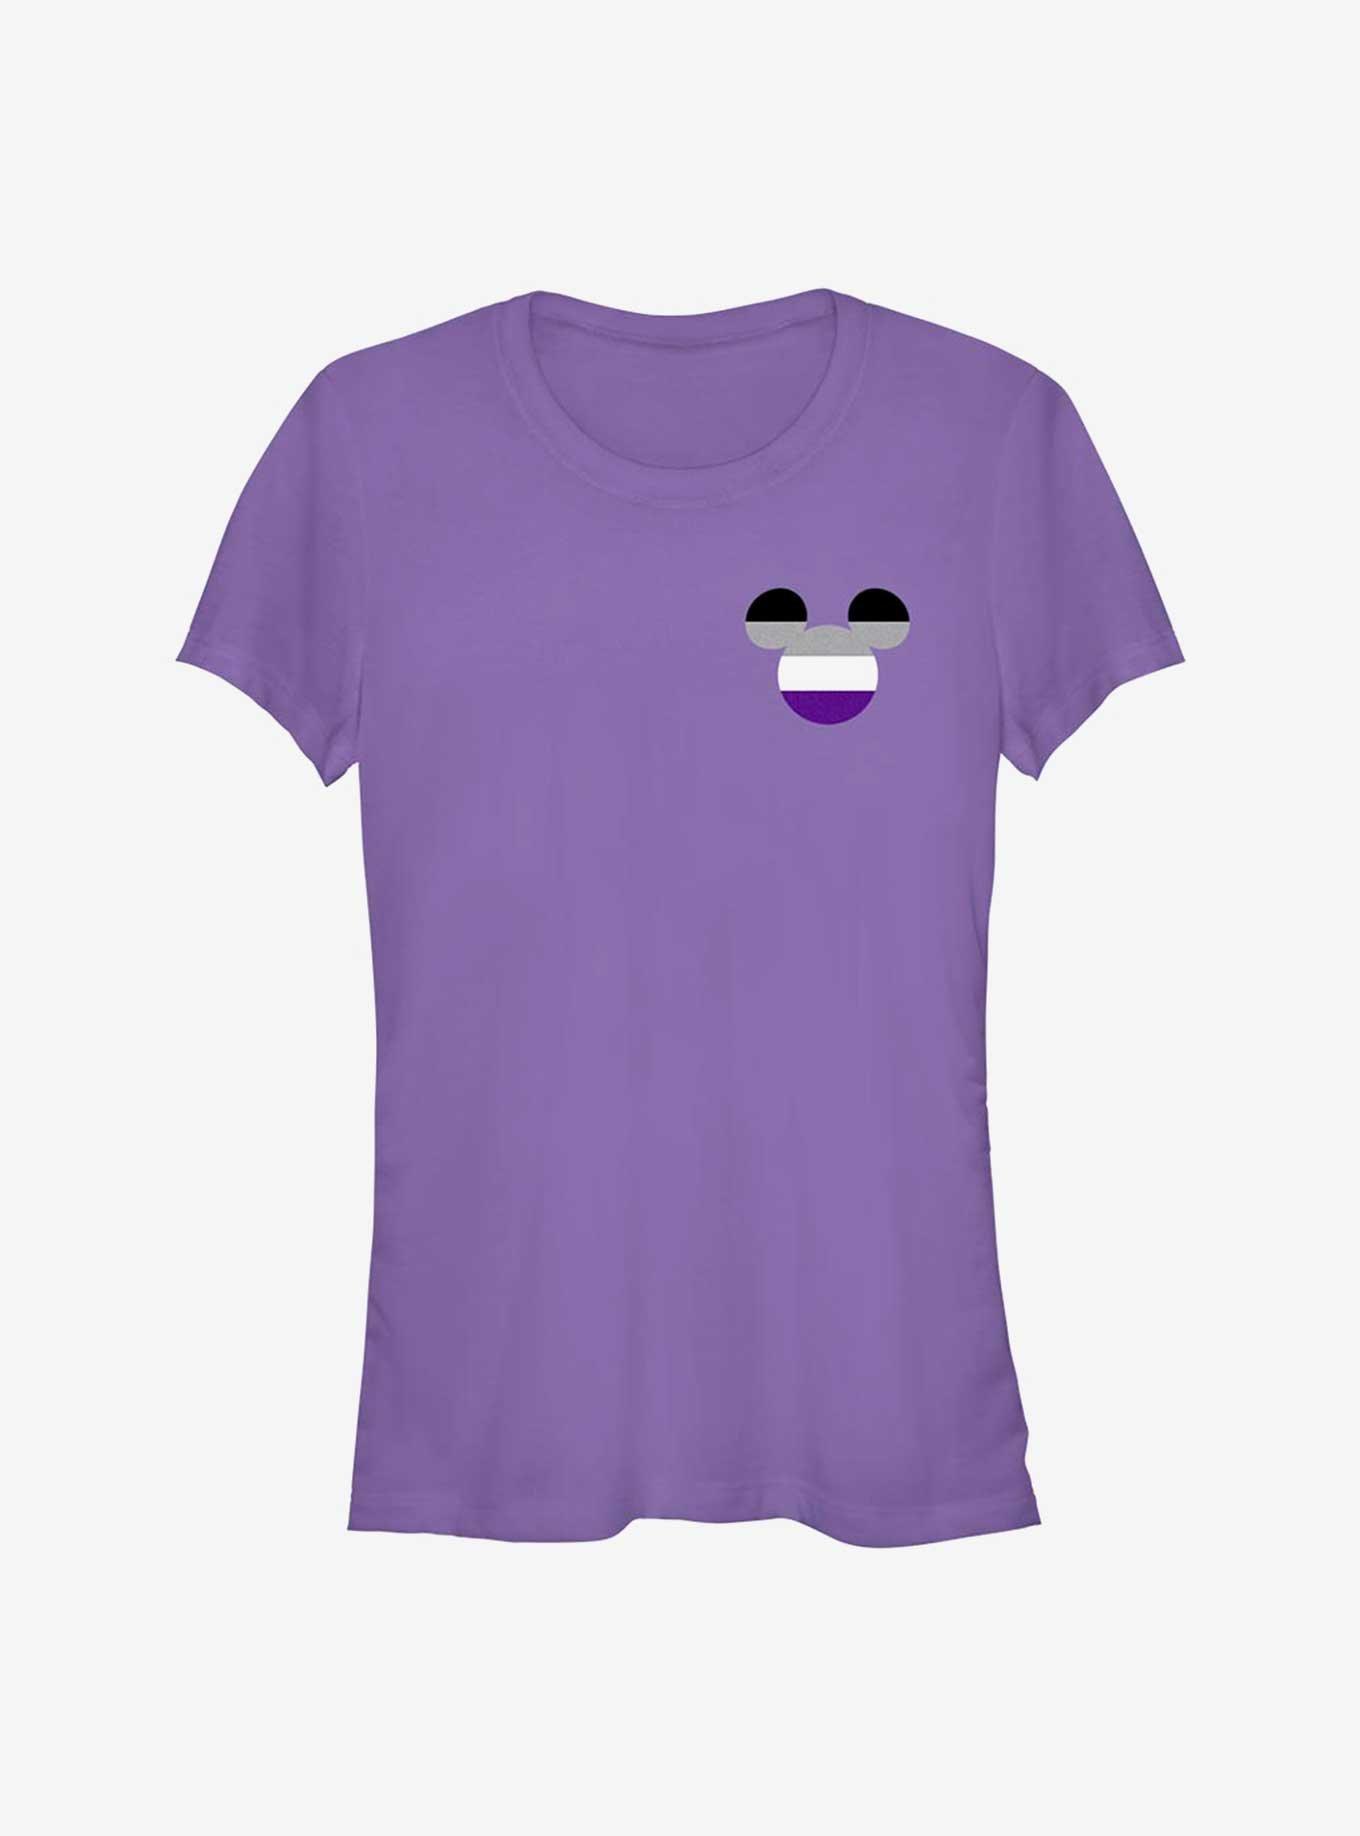 Disney Mickey Mouse Asexual Badge Pride T-Shirt, PURPLE, hi-res